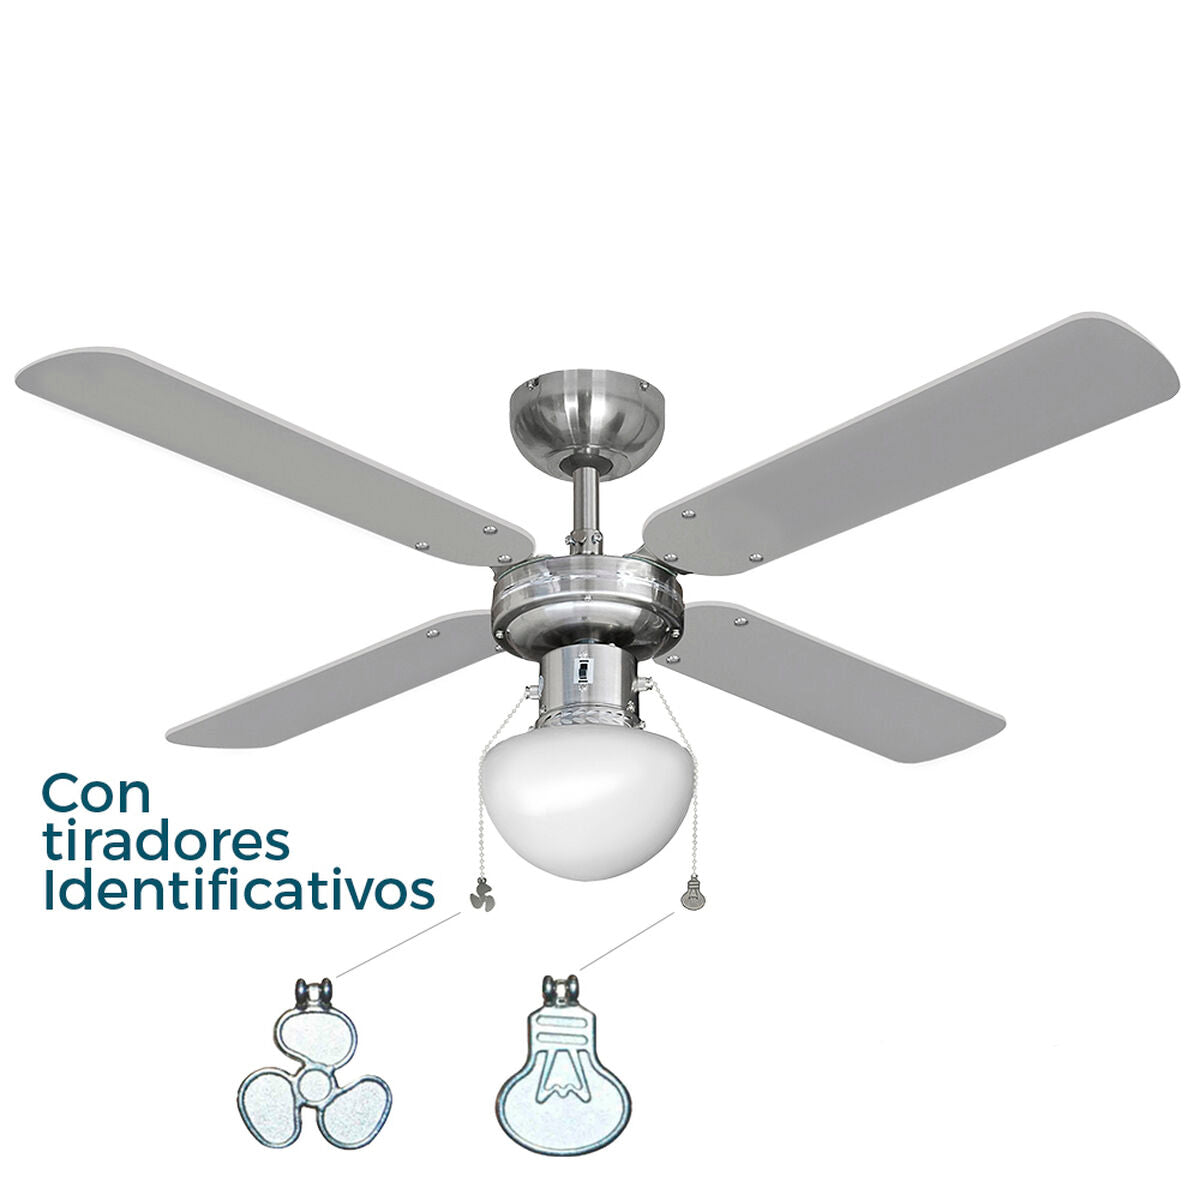 Ceiling Fan with Light EDM 33801 Caribe Silver 50 W, EDM, Lighting, Indoor lighting, ceiling-fan-with-light-edm-33801-caribe-silver-50-w, Brand_EDM, category-reference-2399, category-reference-2450, category-reference-2451, category-reference-t-10333, category-reference-t-10347, category-reference-t-19656, category-reference-t-19657, category-reference-t-21087, category-reference-t-25217, Condition_NEW, ferretería, Price_50 - 100, summer, RiotNook